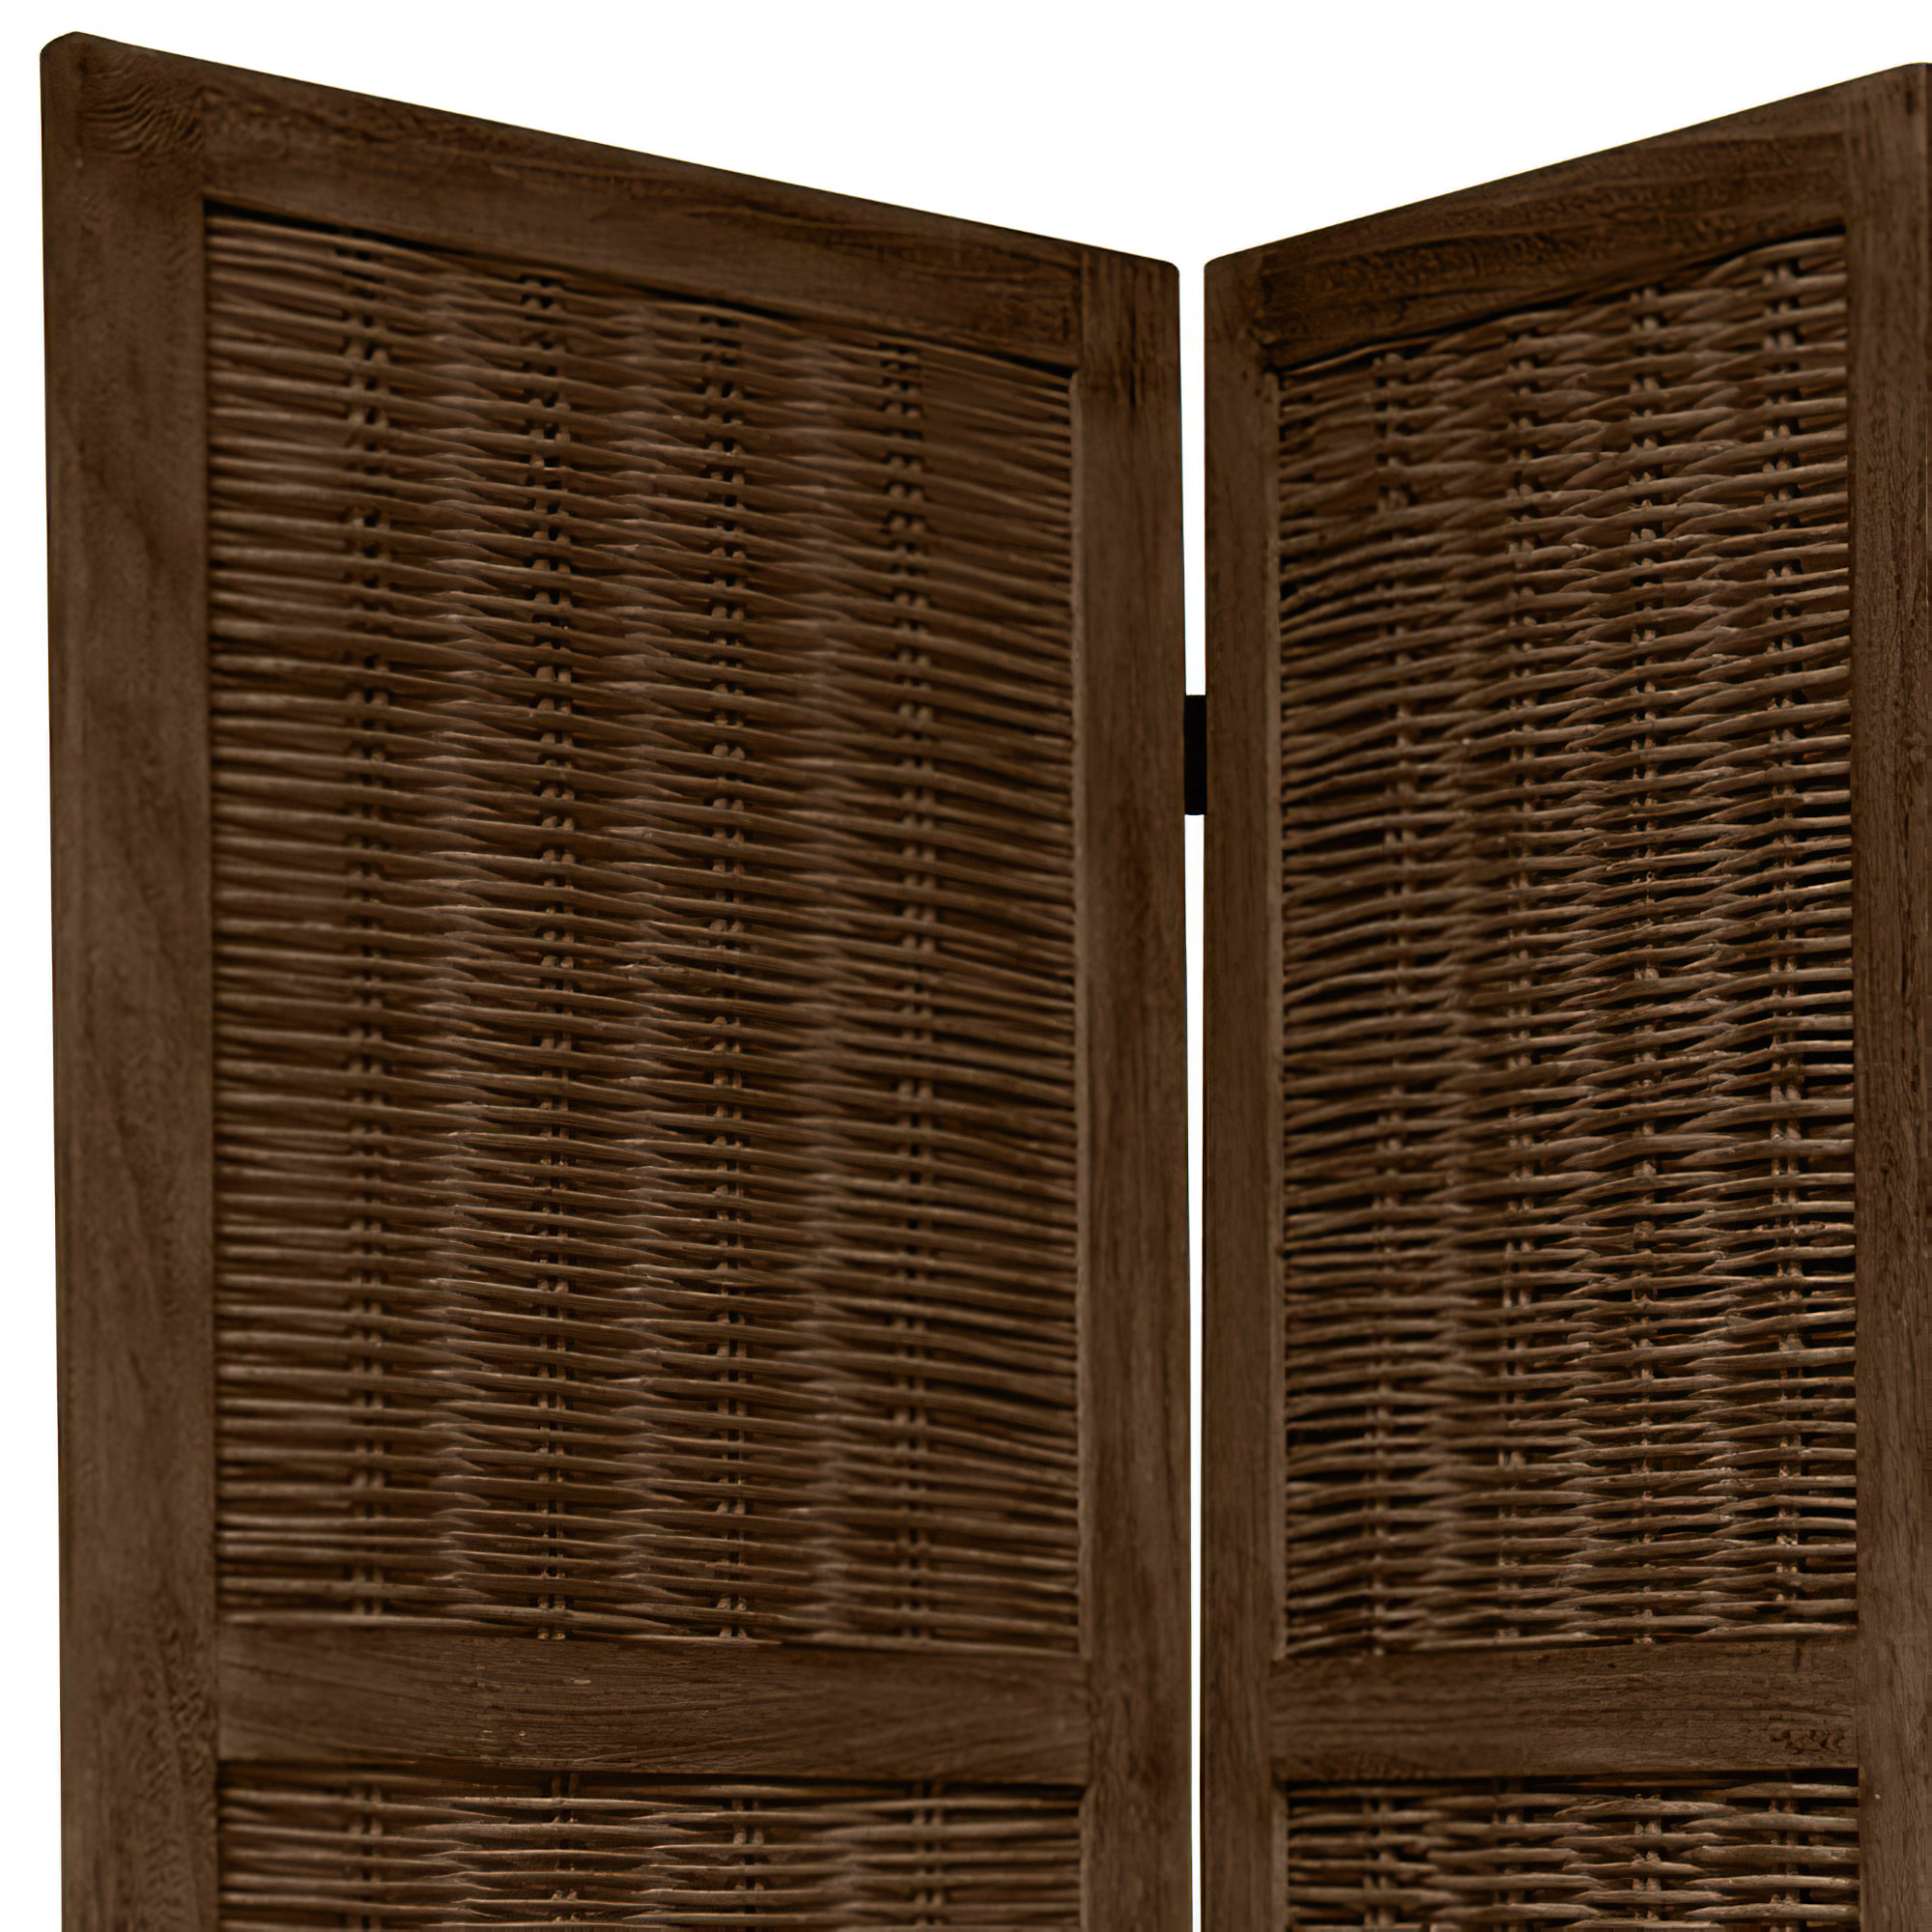 Oriental Furniture 5 1/2 ft. Tall Bamboo Matchstick Screen - Brown - 4 Panel - image 2 of 3